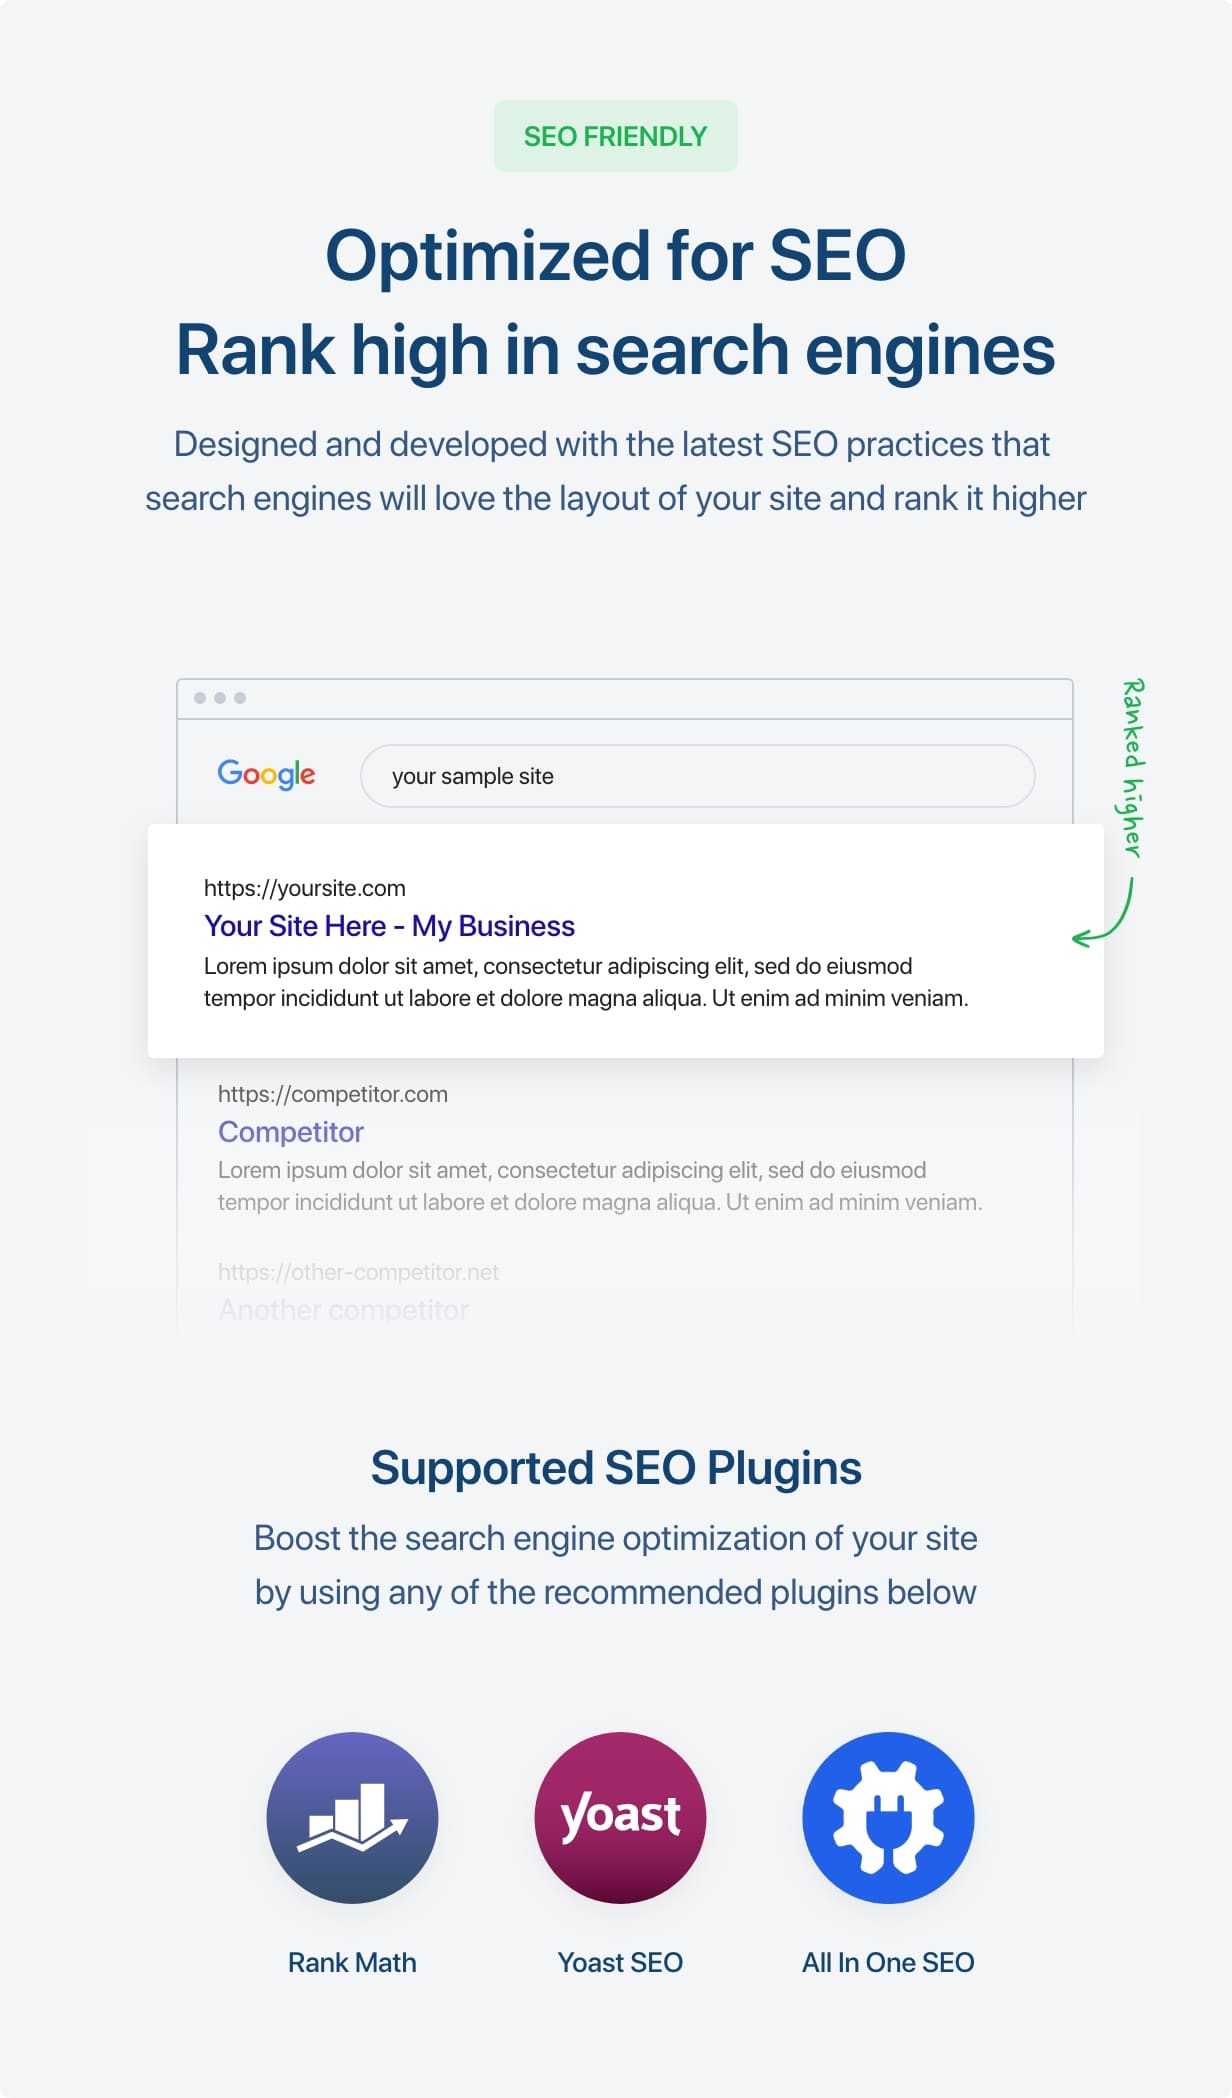 Optimized for SEO, Rank high in search engines